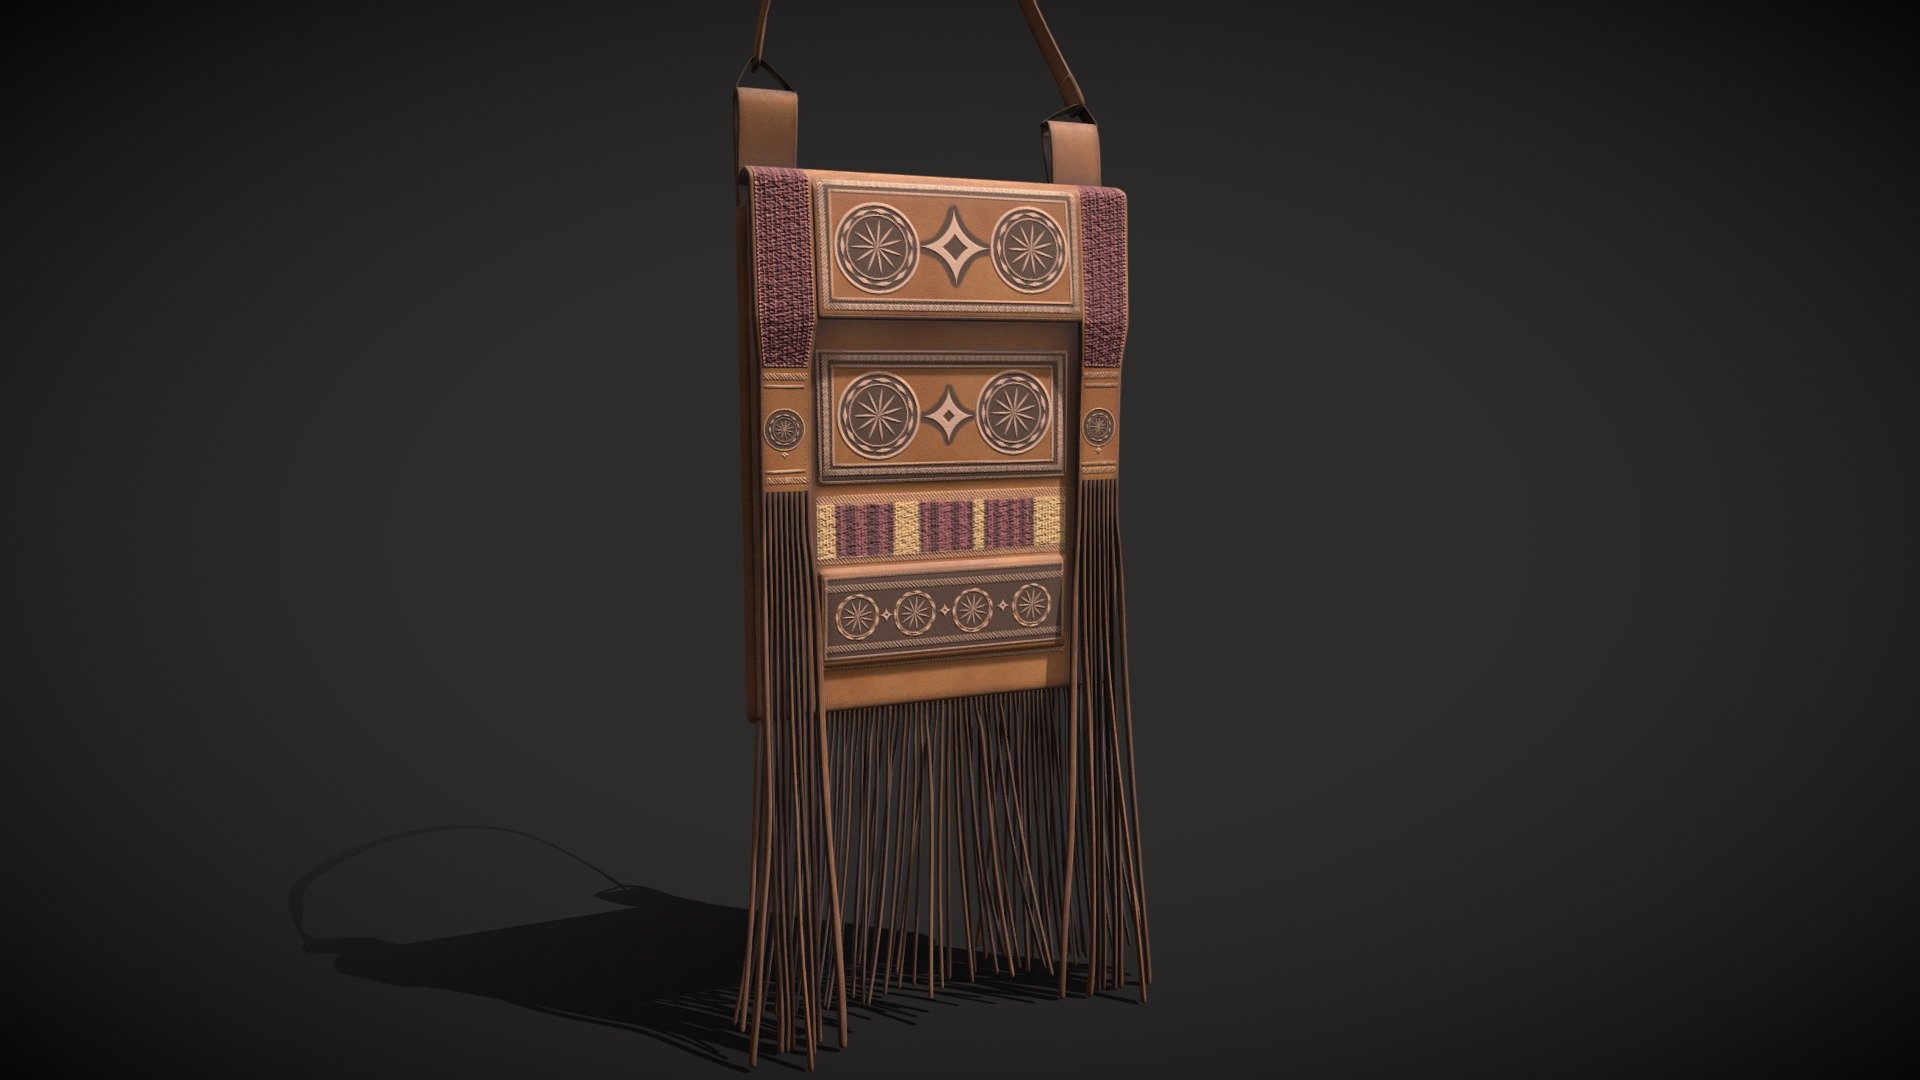 Tanned leather bag with geometric decoration characteristic of Berber culture from between the 11th and 12th century used habitually in the civil and military context of Al-Andalus during the Almohad caliphate.
Historically accurate game ready asset modeled in Blender and high quality PBR (Diffuse/Metallic/Roughness/Normal_OpenGL) textures in Substance Painter at 4k 2k and 1k resolution and subdivision ready for different LOD implementations, at FBX and OBJ files to work with any 3D software. 

LOD 00
Vertex 45664
Faces 45212

LOD 01
Vertex 11568
Faces 11270

References:

https://www.ideal.es/granada/exposicion-granada-ziri-universo-bereber-20191205135226-ga.html?ref=https%3A%2F%2Fwww.google.es%2F - Berber Medieval Bag - Buy Royalty Free 3D model by XYZ 3Dassets (@XYZ3Dassets) 3d model